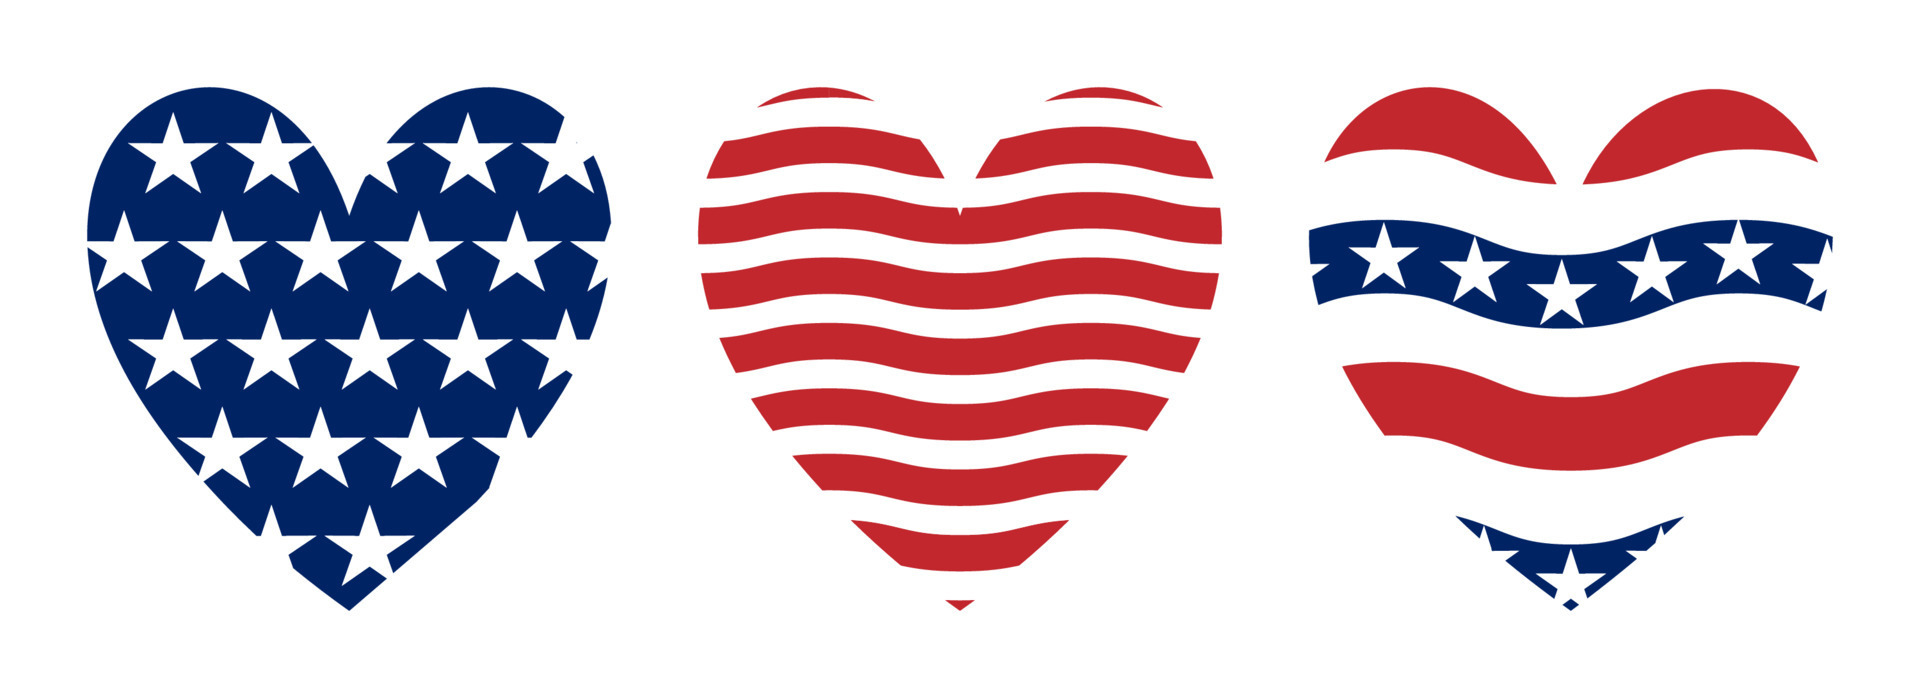 Clipart consisting of 3 heart-shaped pieces made of American flags, used as a symbol for Independence Day celebration.